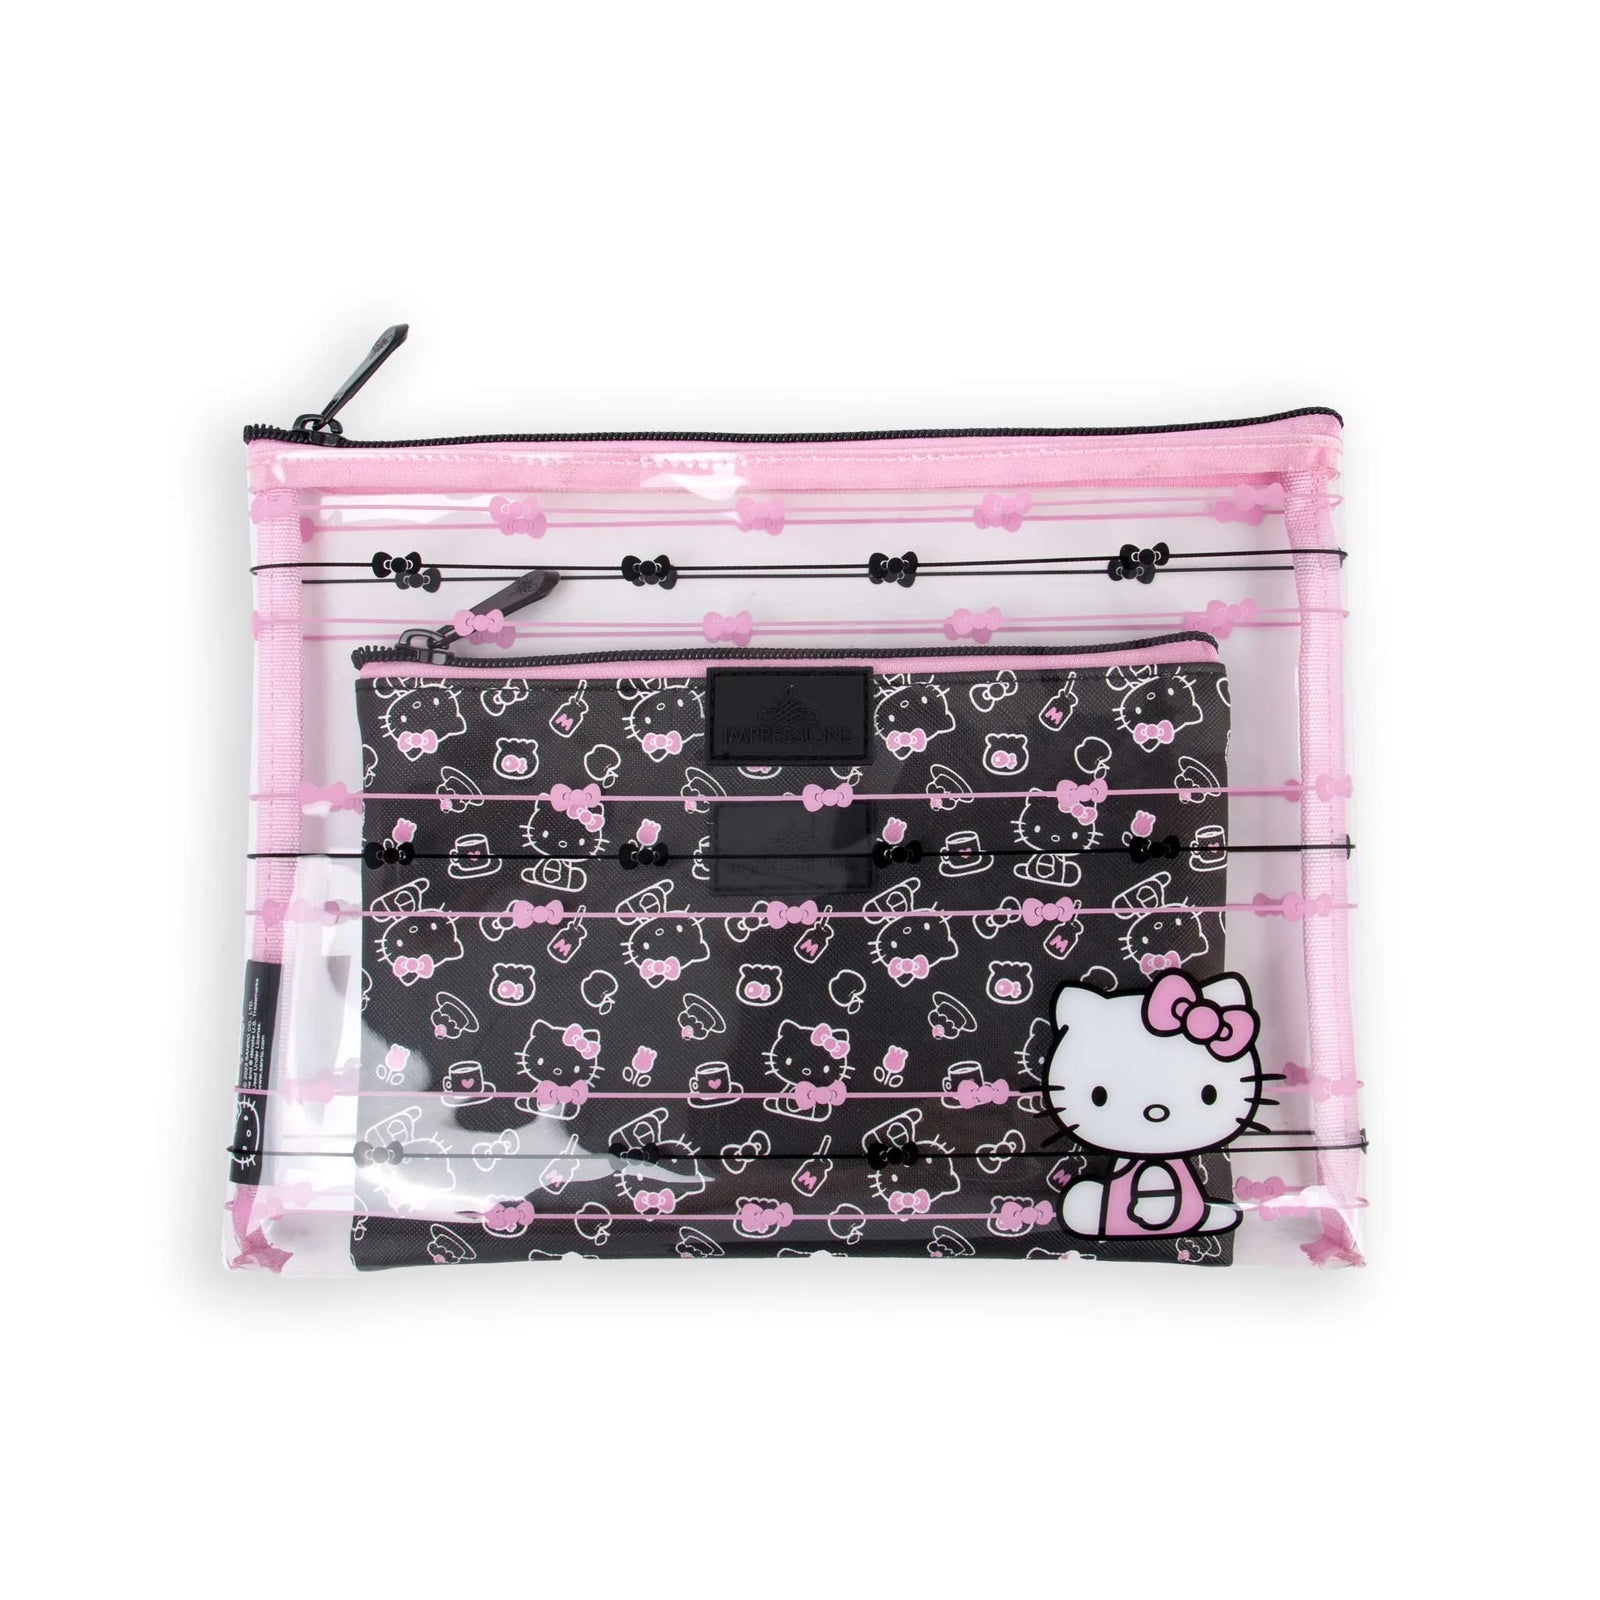 Small Cosmetic Bag Cute Makeup Bag Y2k Accessories Aesthetic Make Up Bag  Y2k Purse Cosmetic Bag for Purse 